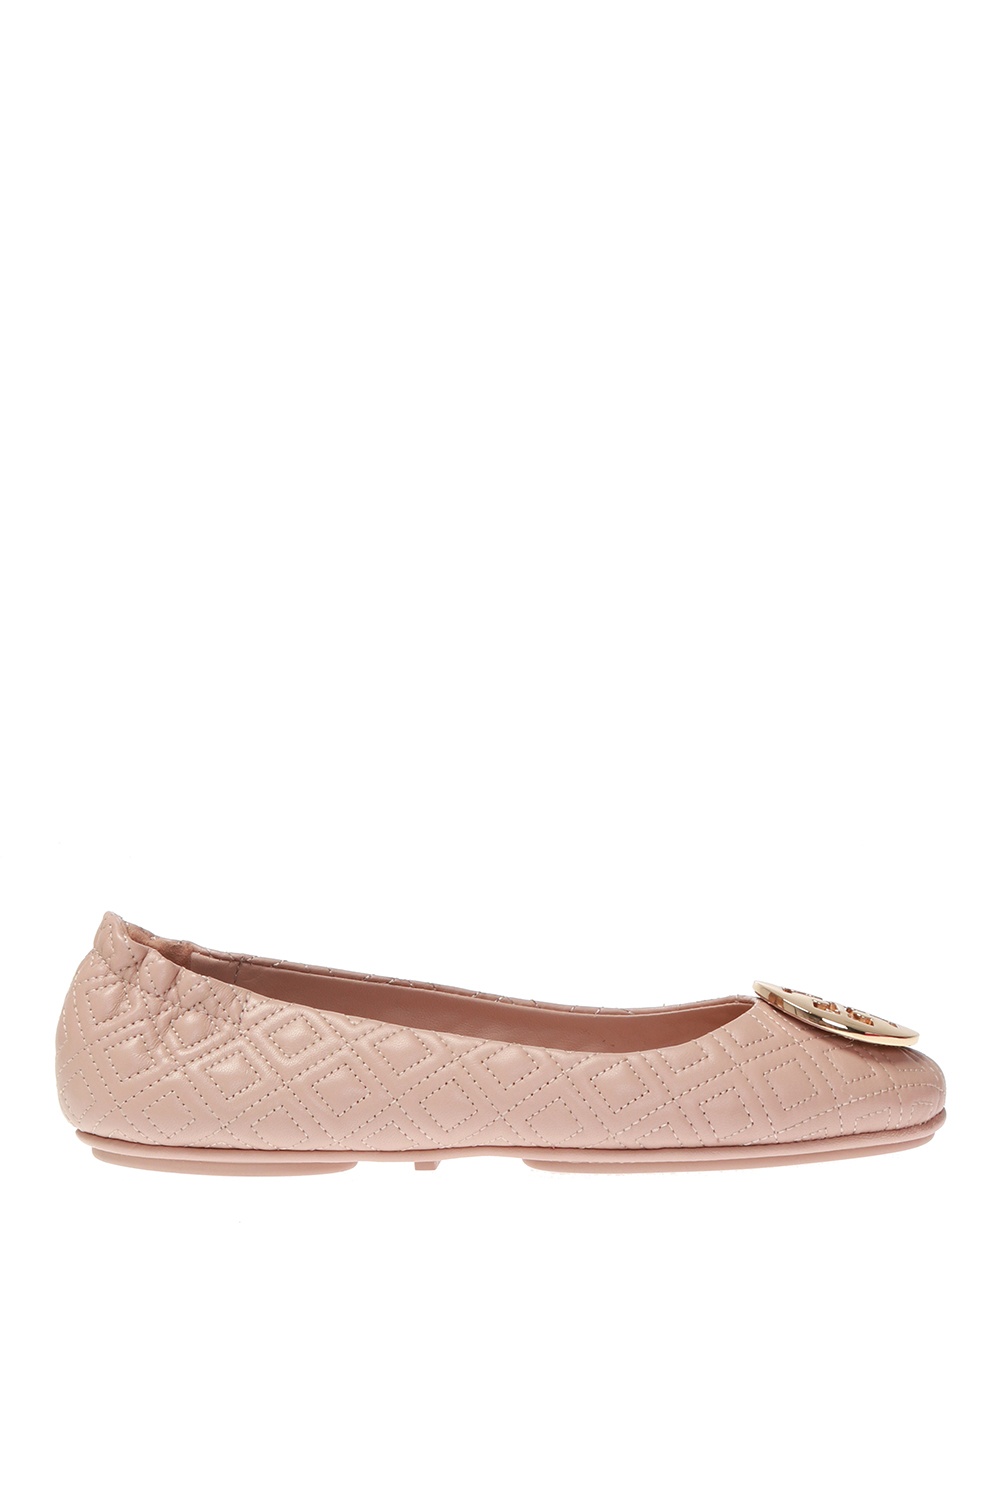 Pink Leather ballet flats with logo Tory Burch - Vitkac Sweden